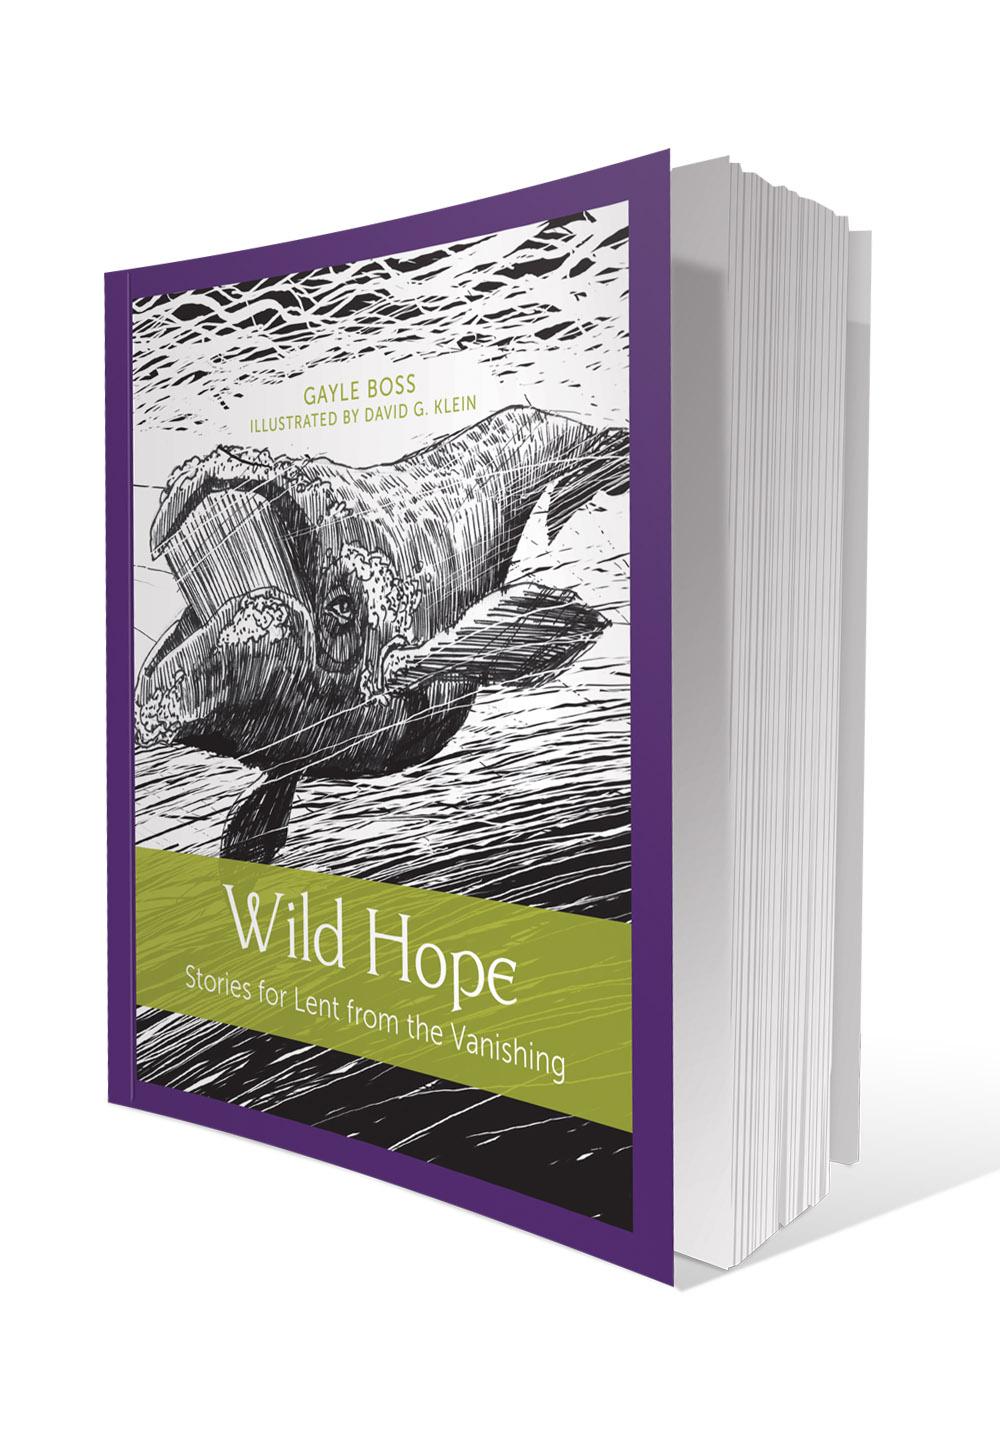 Wild Hope: Stories for Lent from the Vanishing by Gayle Boss, Illustrated by David G. Klein; Paraclete Press